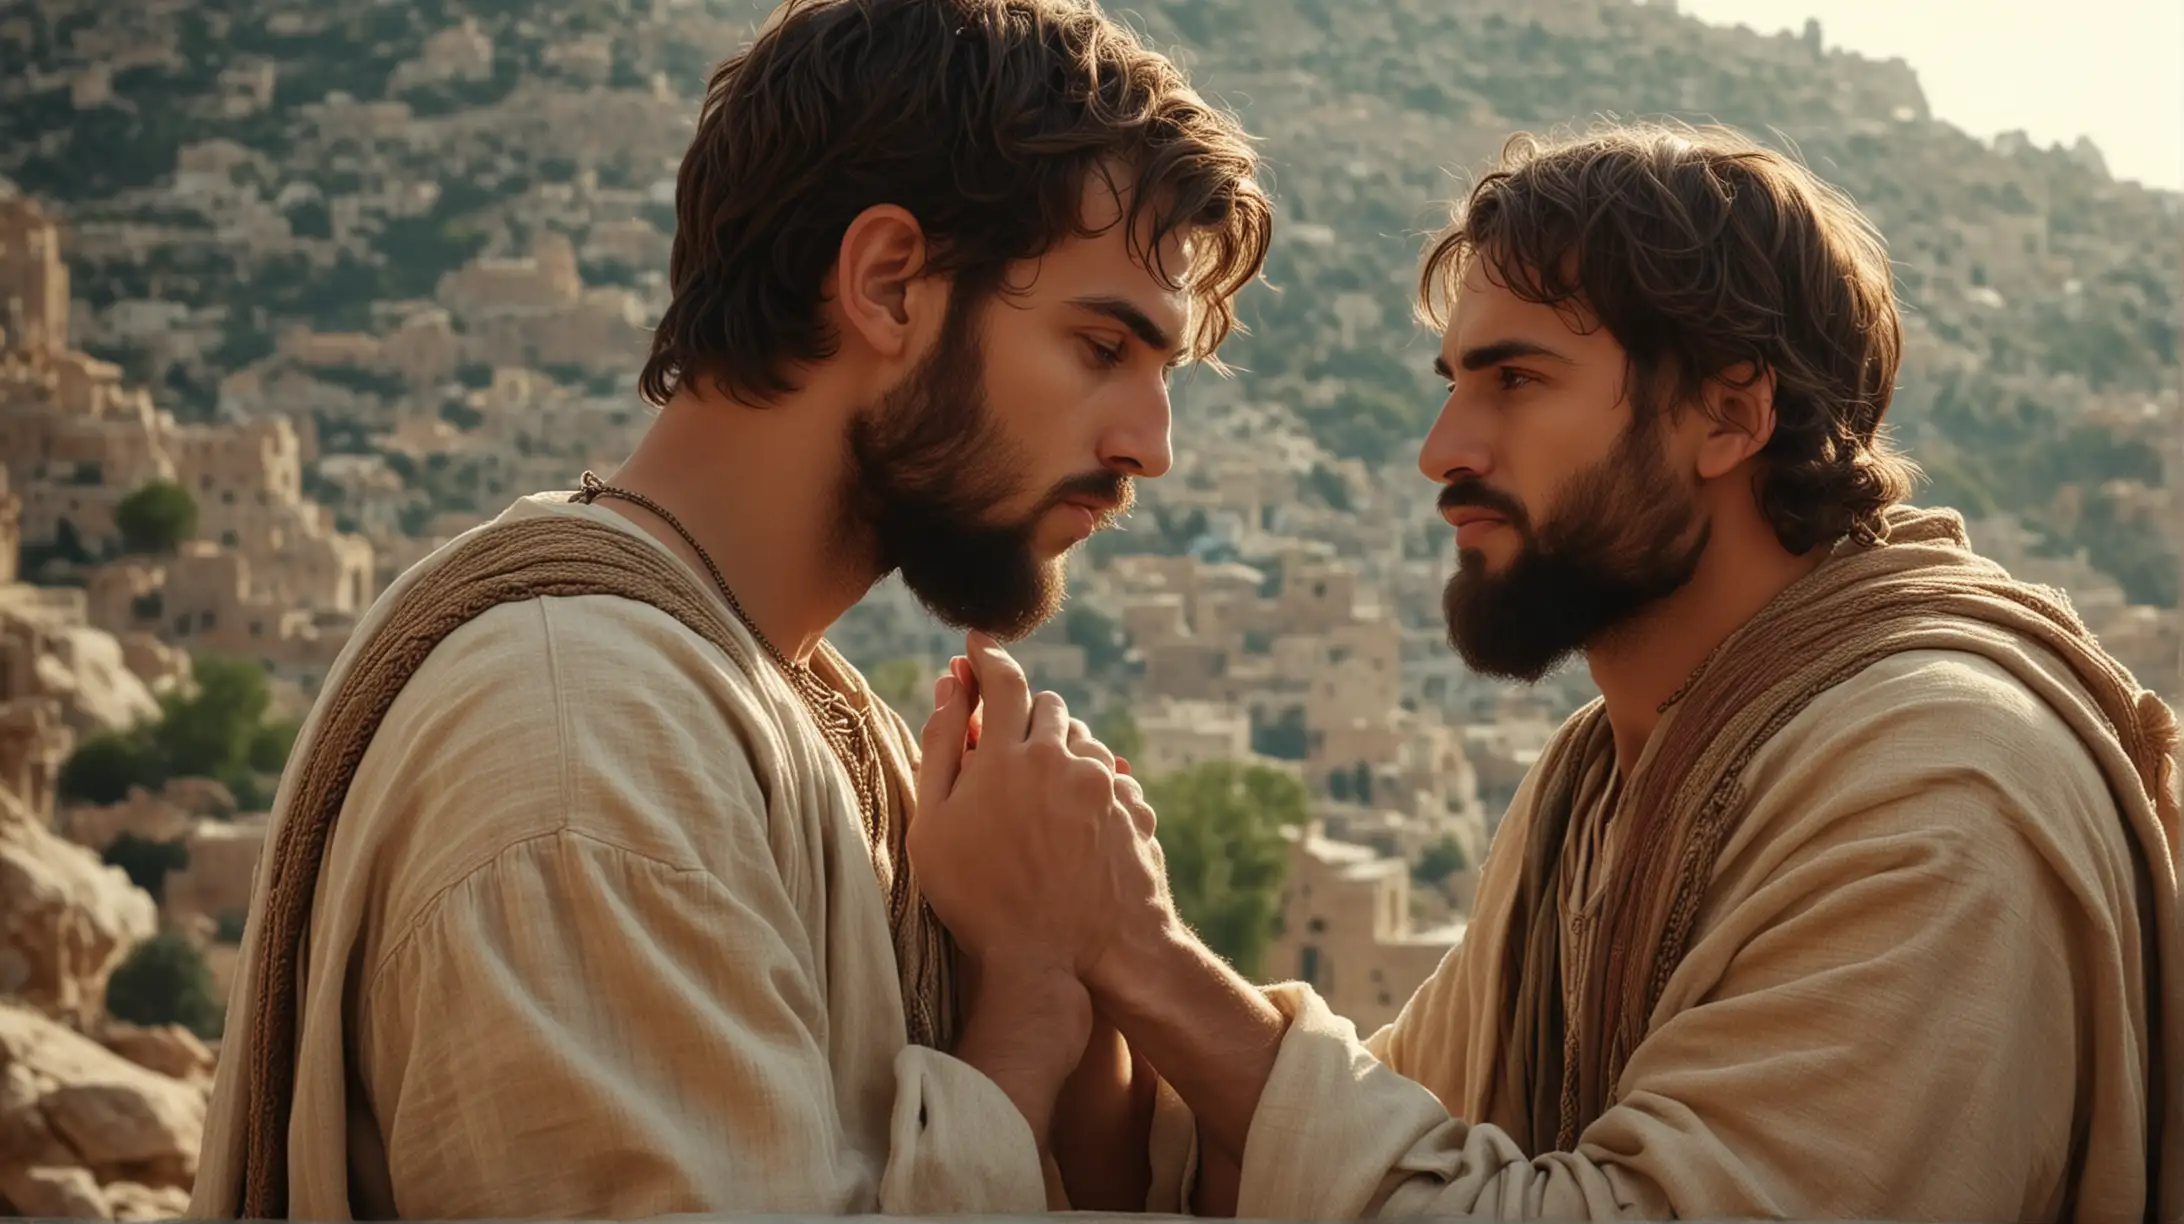 Young Apostle Paul and Christ in Love Embracing in Biblical Jerusalem Landscape